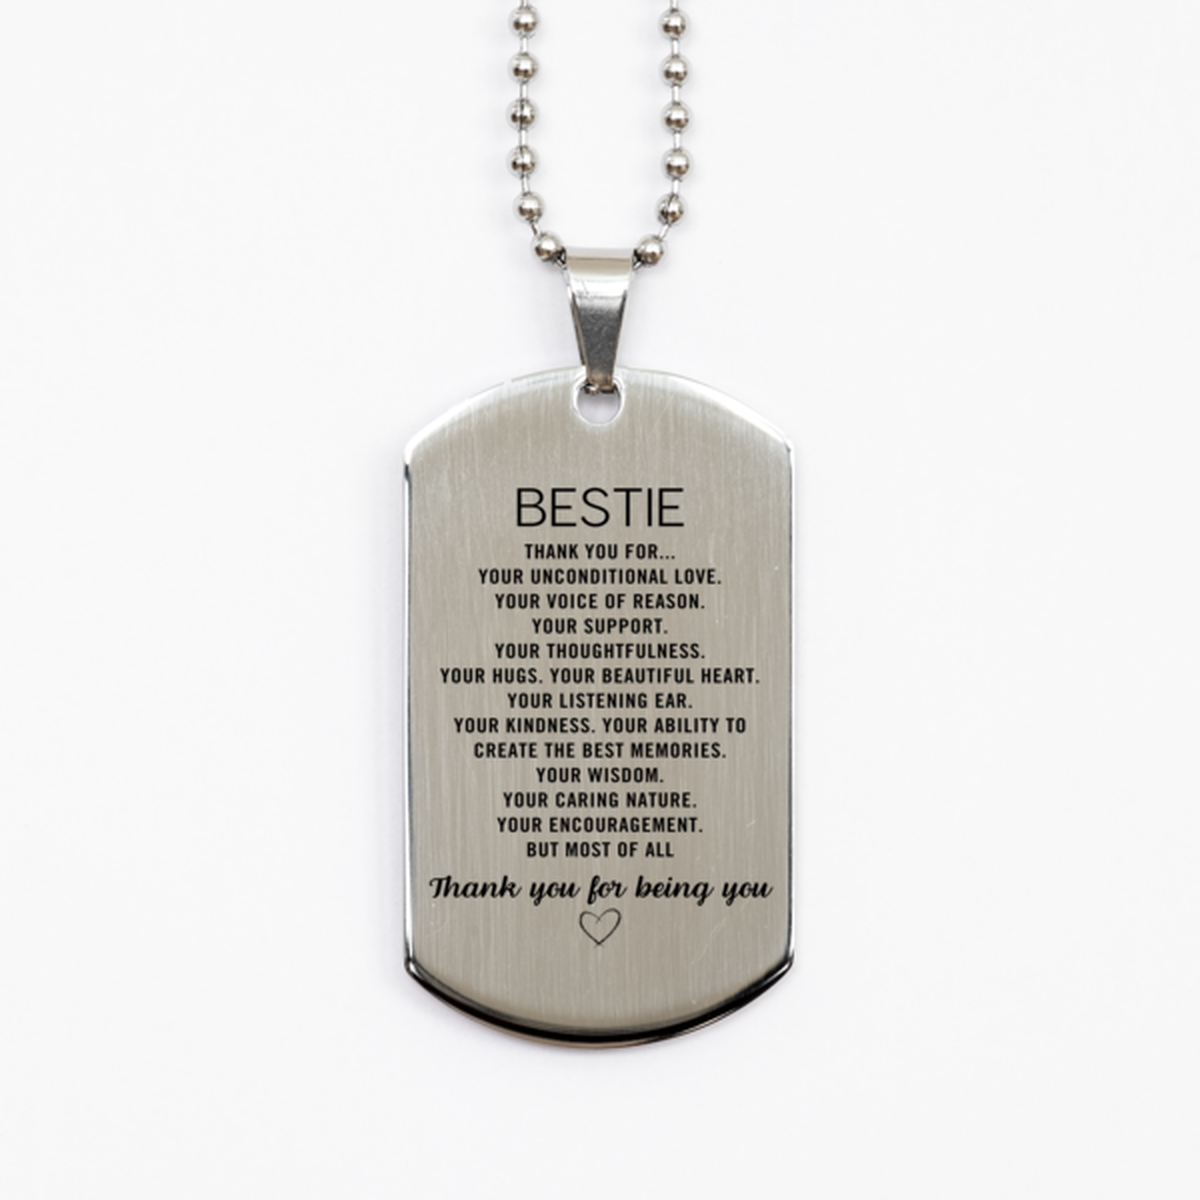 Bestie Silver Dog Tag Custom, Engraved Gifts For Bestie Christmas Graduation Birthday Gifts for Men Women Bestie Thank you for Your unconditional love